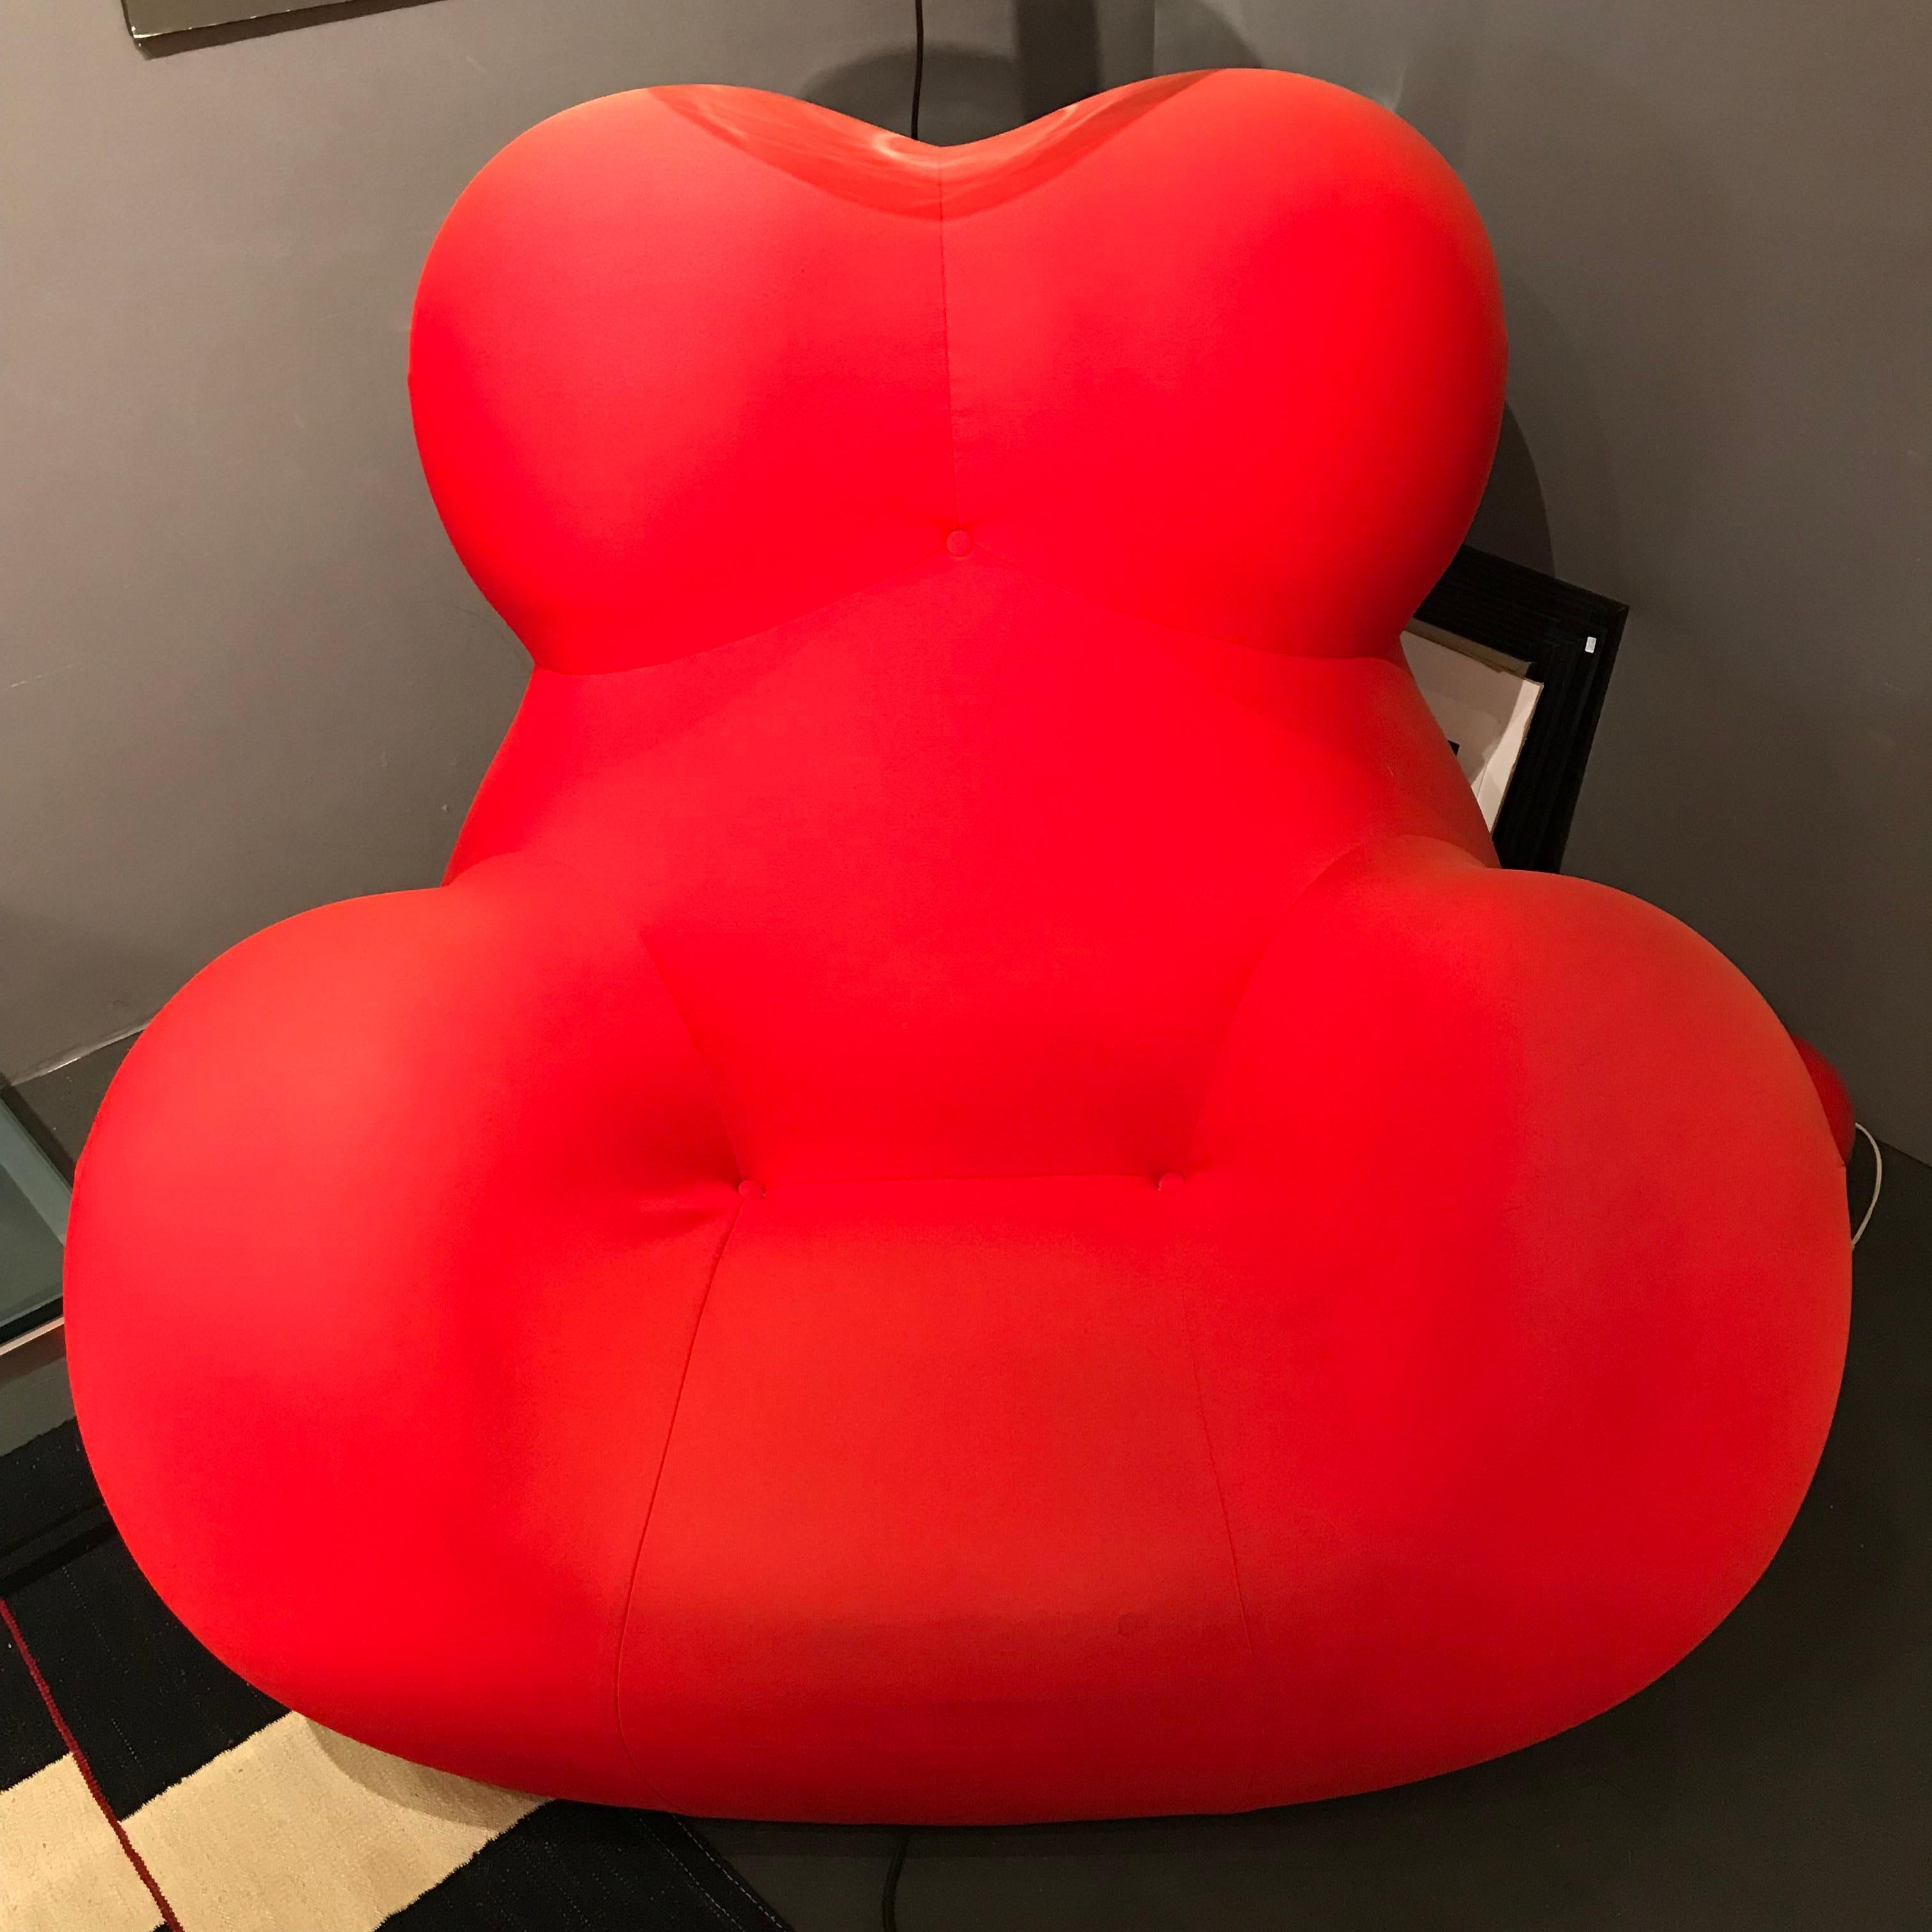 Gaetano Pesce, La Mamma up 5 and up 6 by B and B Italia
Iconic armchair and footrest
Made in 1969, it has as a nickname 